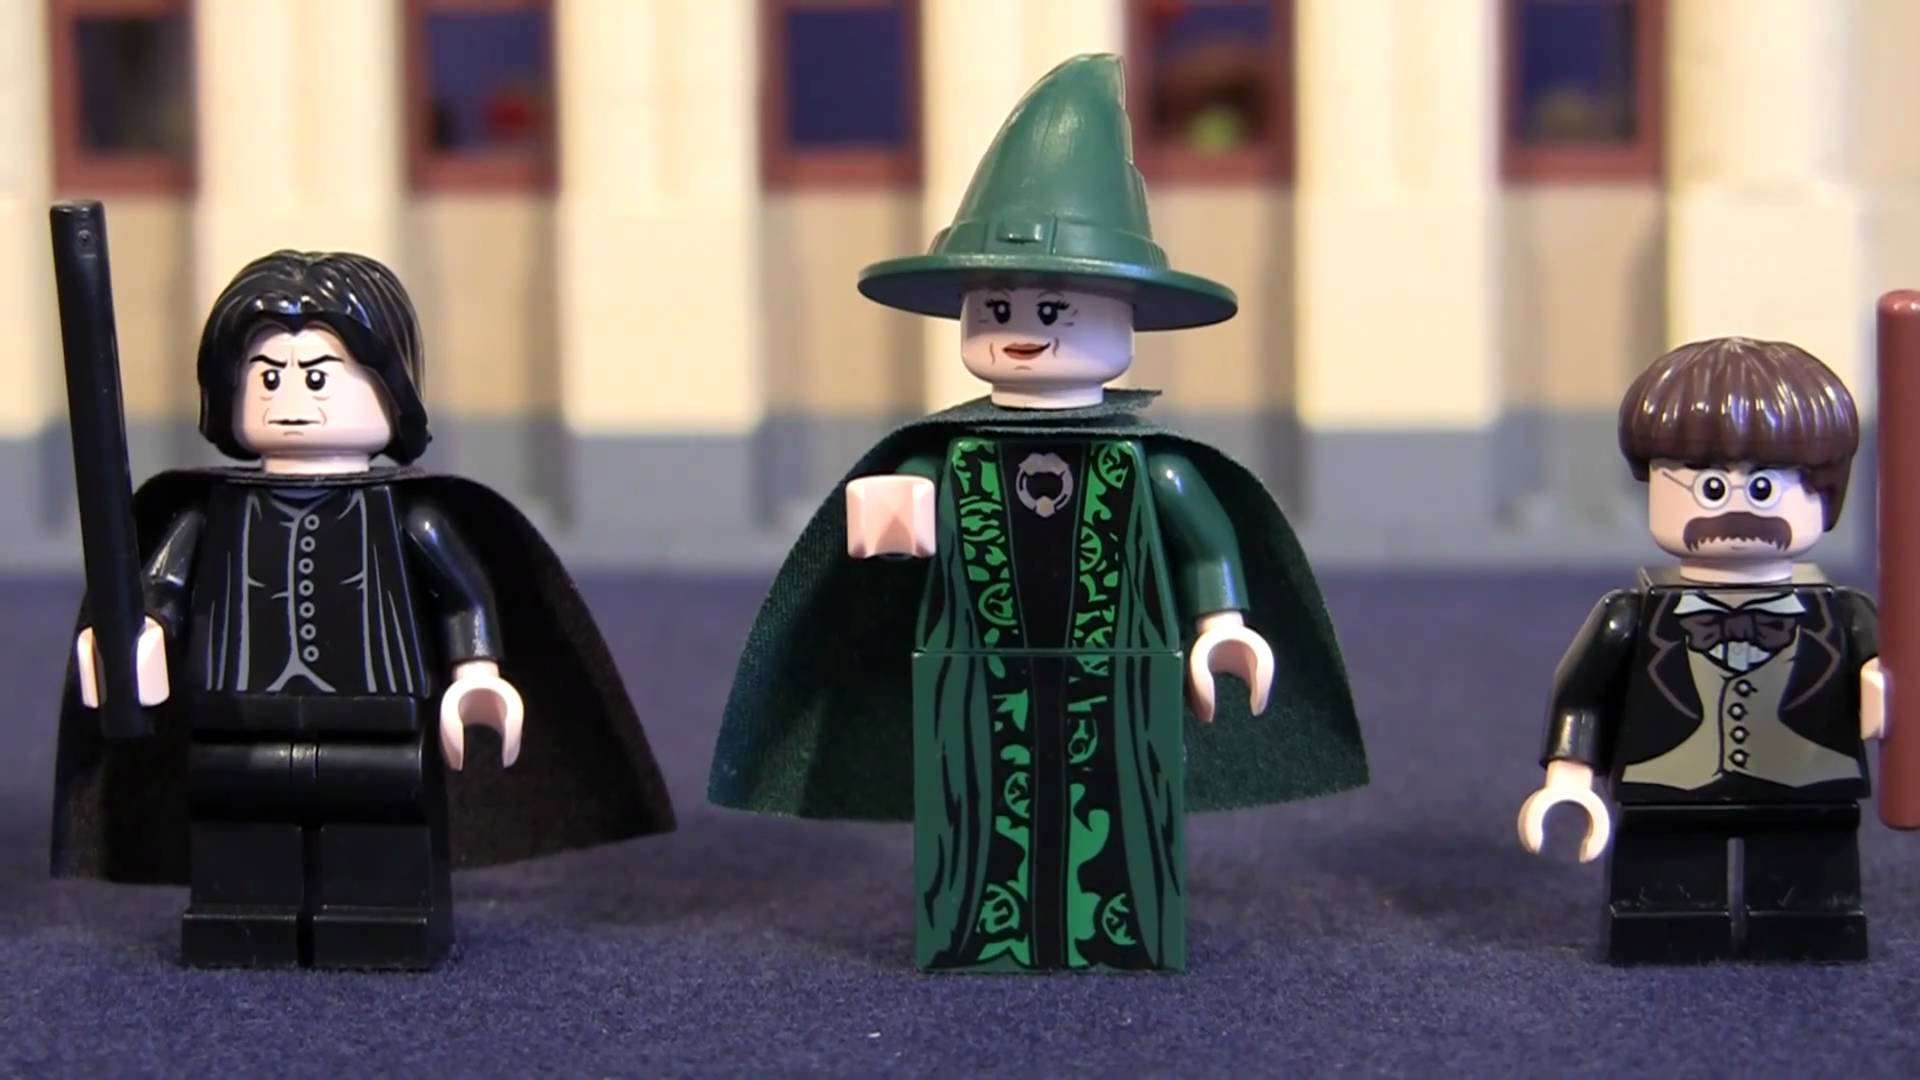 Lego Harry Potter Characters - Wallpaper, High Definition, High Quality